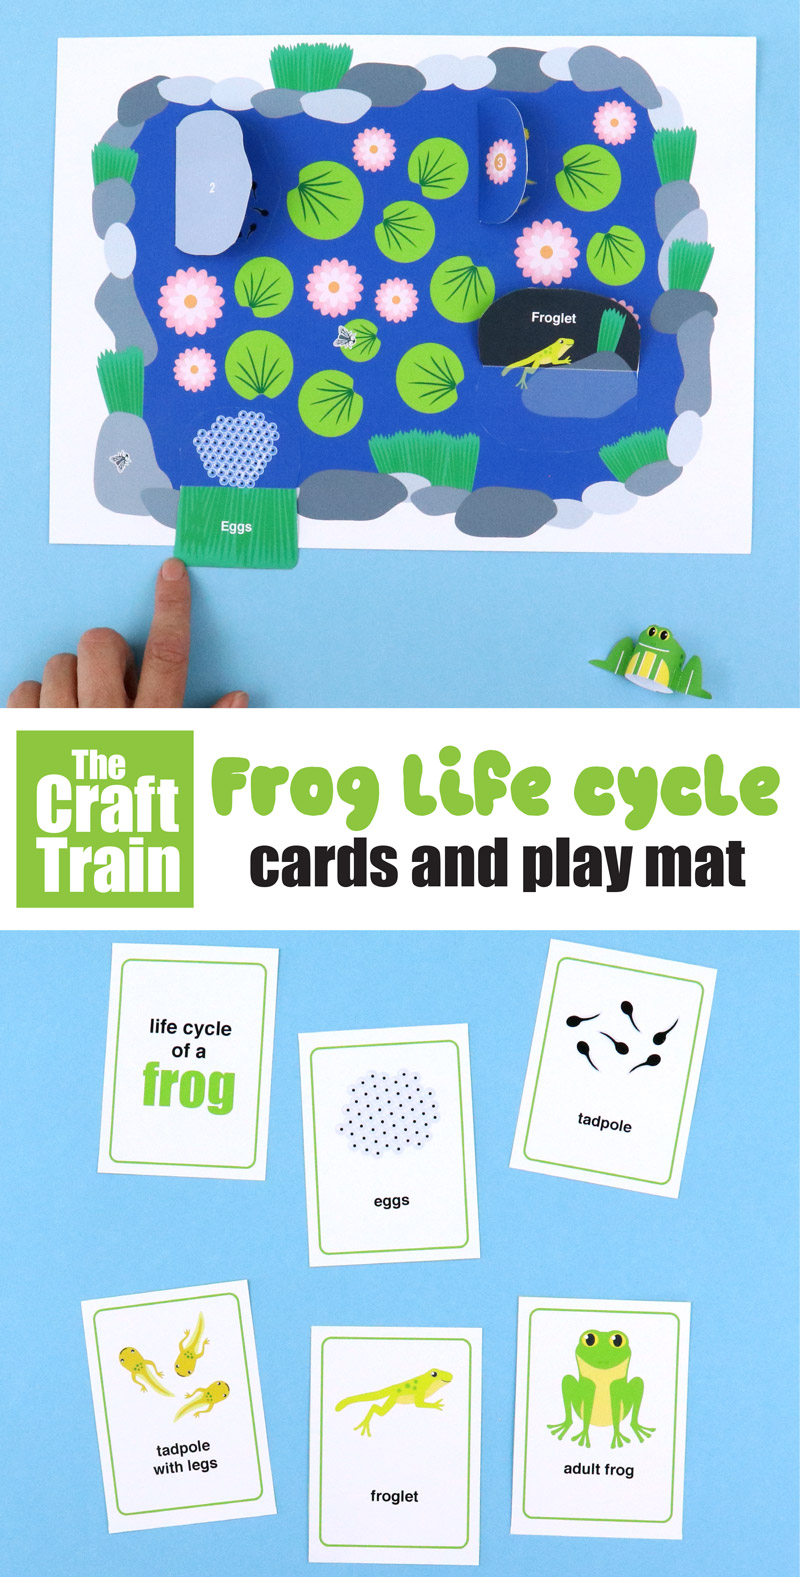 Frog lifecycle printable interactive play mat for kids with an accompanying set of sequence cards